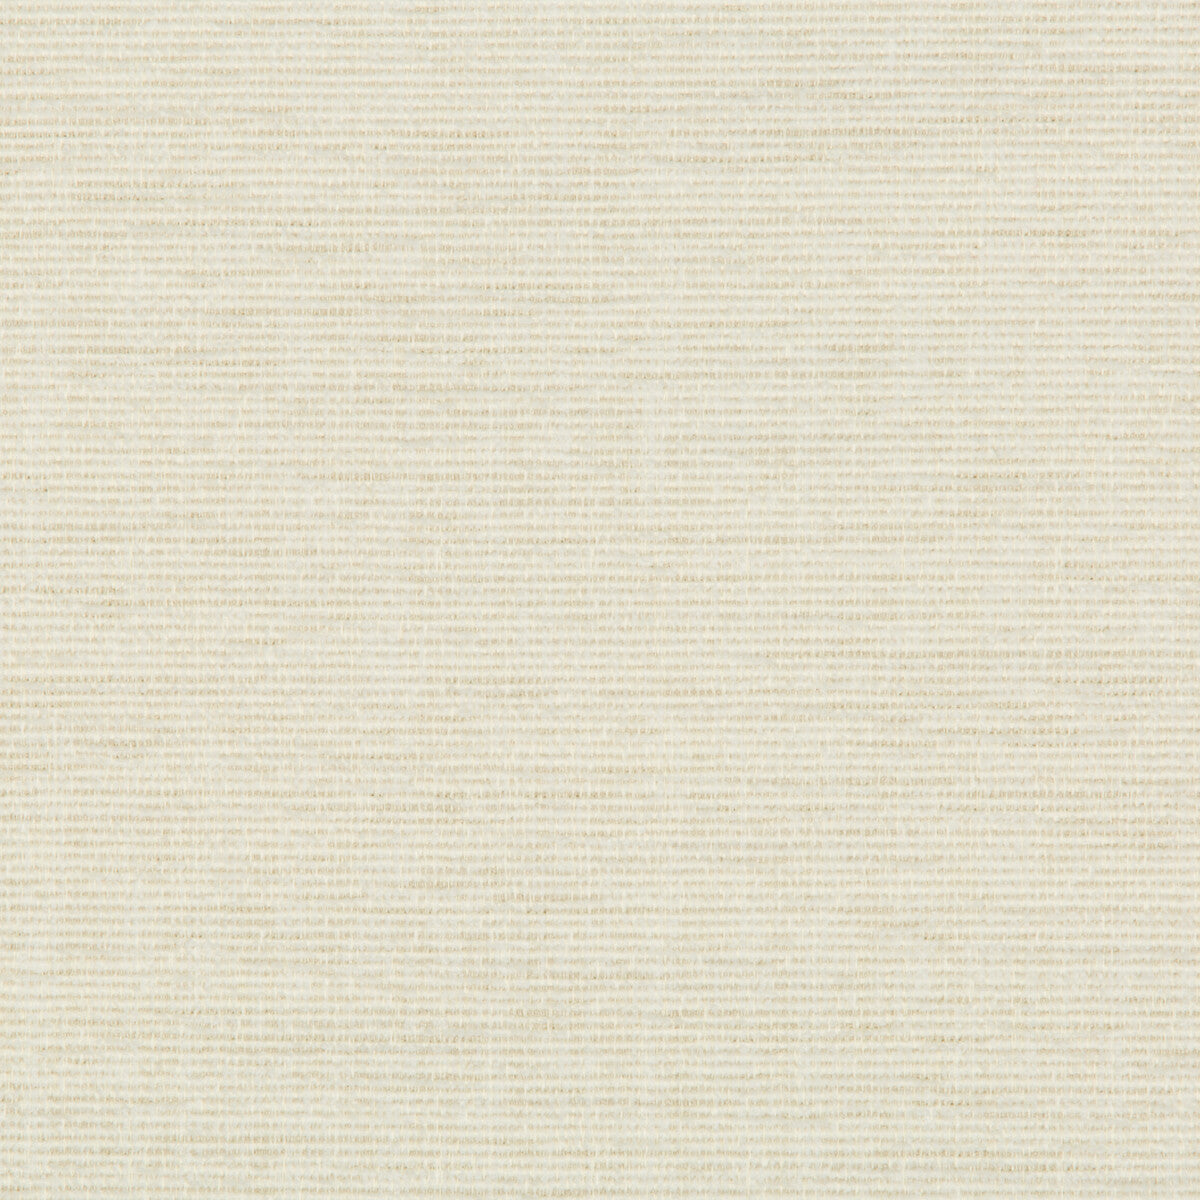 Kravet Contract fabric in 35006-116 color - pattern 35006.116.0 - by Kravet Contract in the Incase Crypton Gis collection